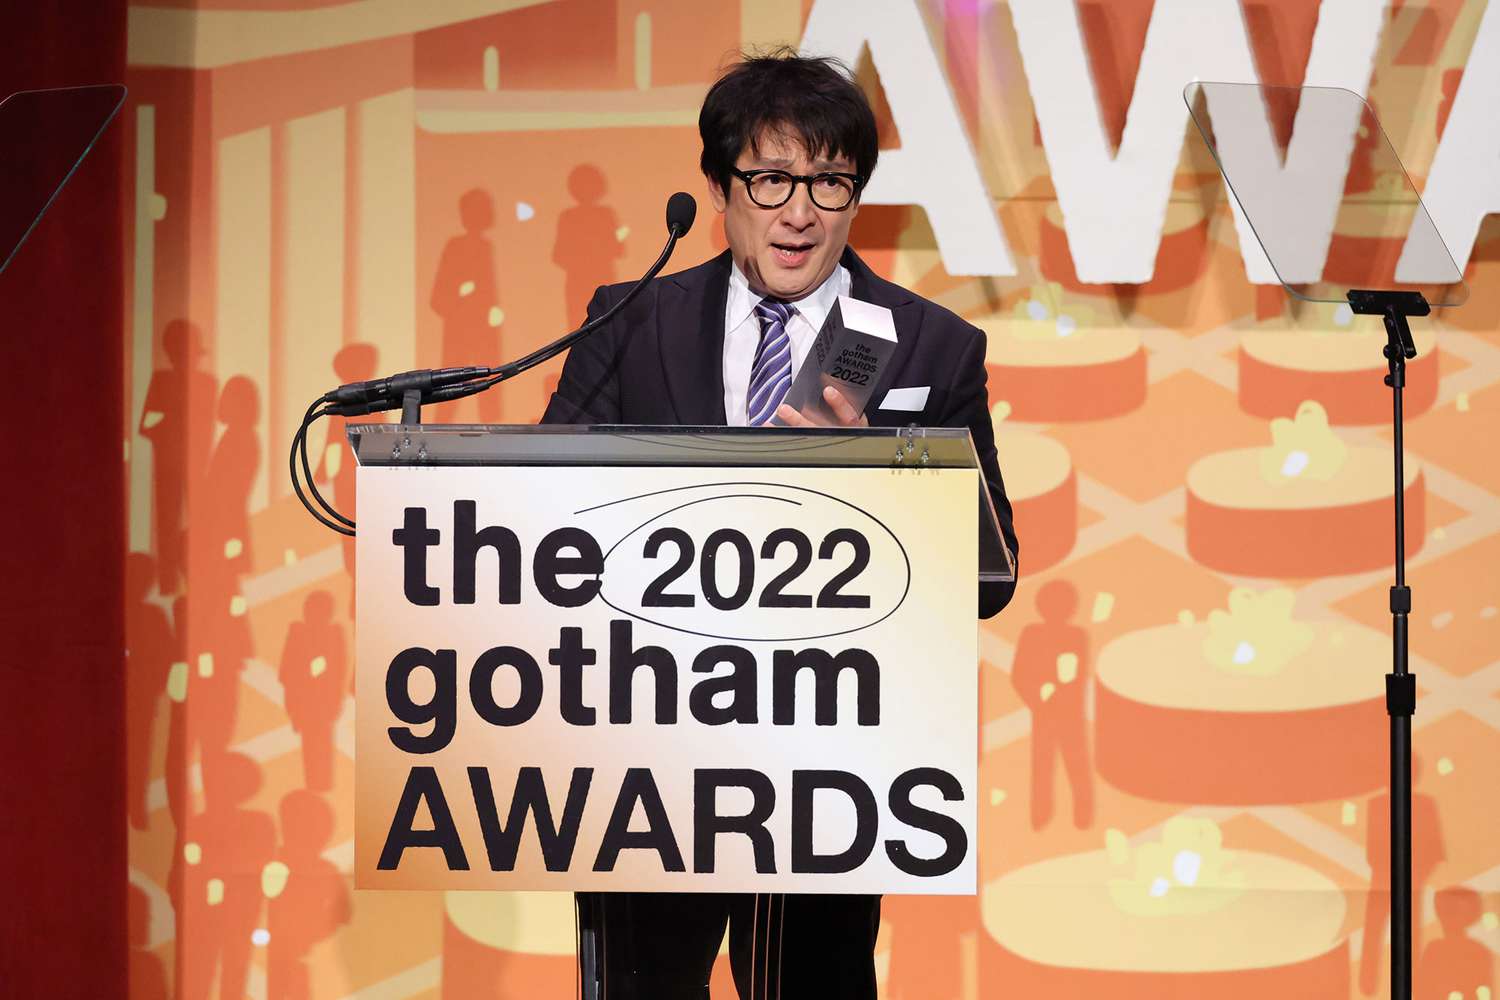 Ke Huy Quan accepts the Outstanding Supporting Performance award onstage during The 2022 Gotham Awards at Cipriani Wall Street on November 28, 2022 in New York City.